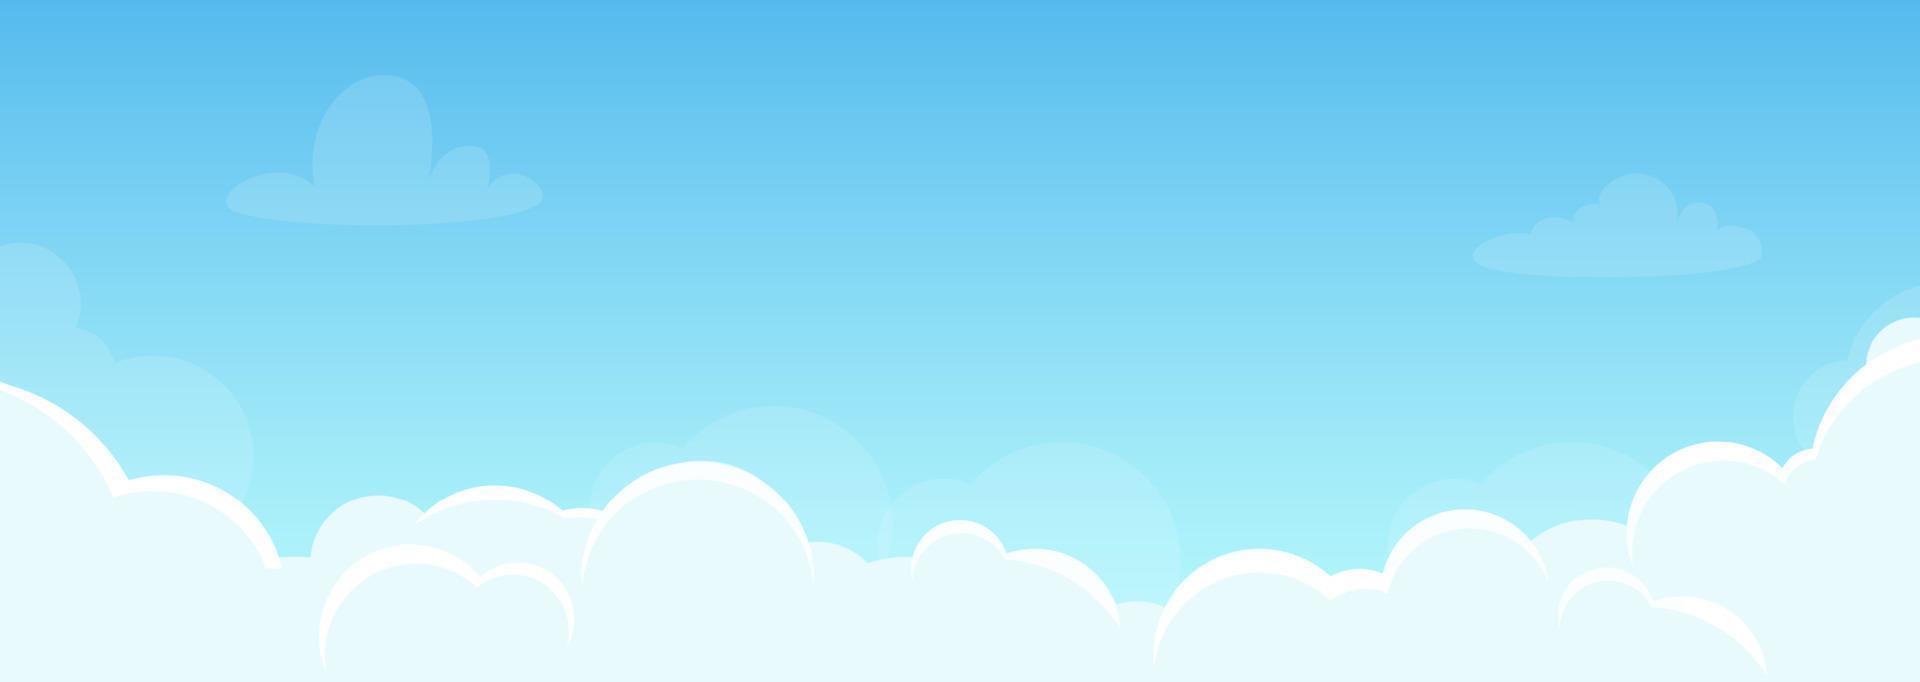 Background with sky and beautiful clouds. Illustration for flyer, banner in horizontal orientation. Good weather, clear sky. Vector, flat style. vector